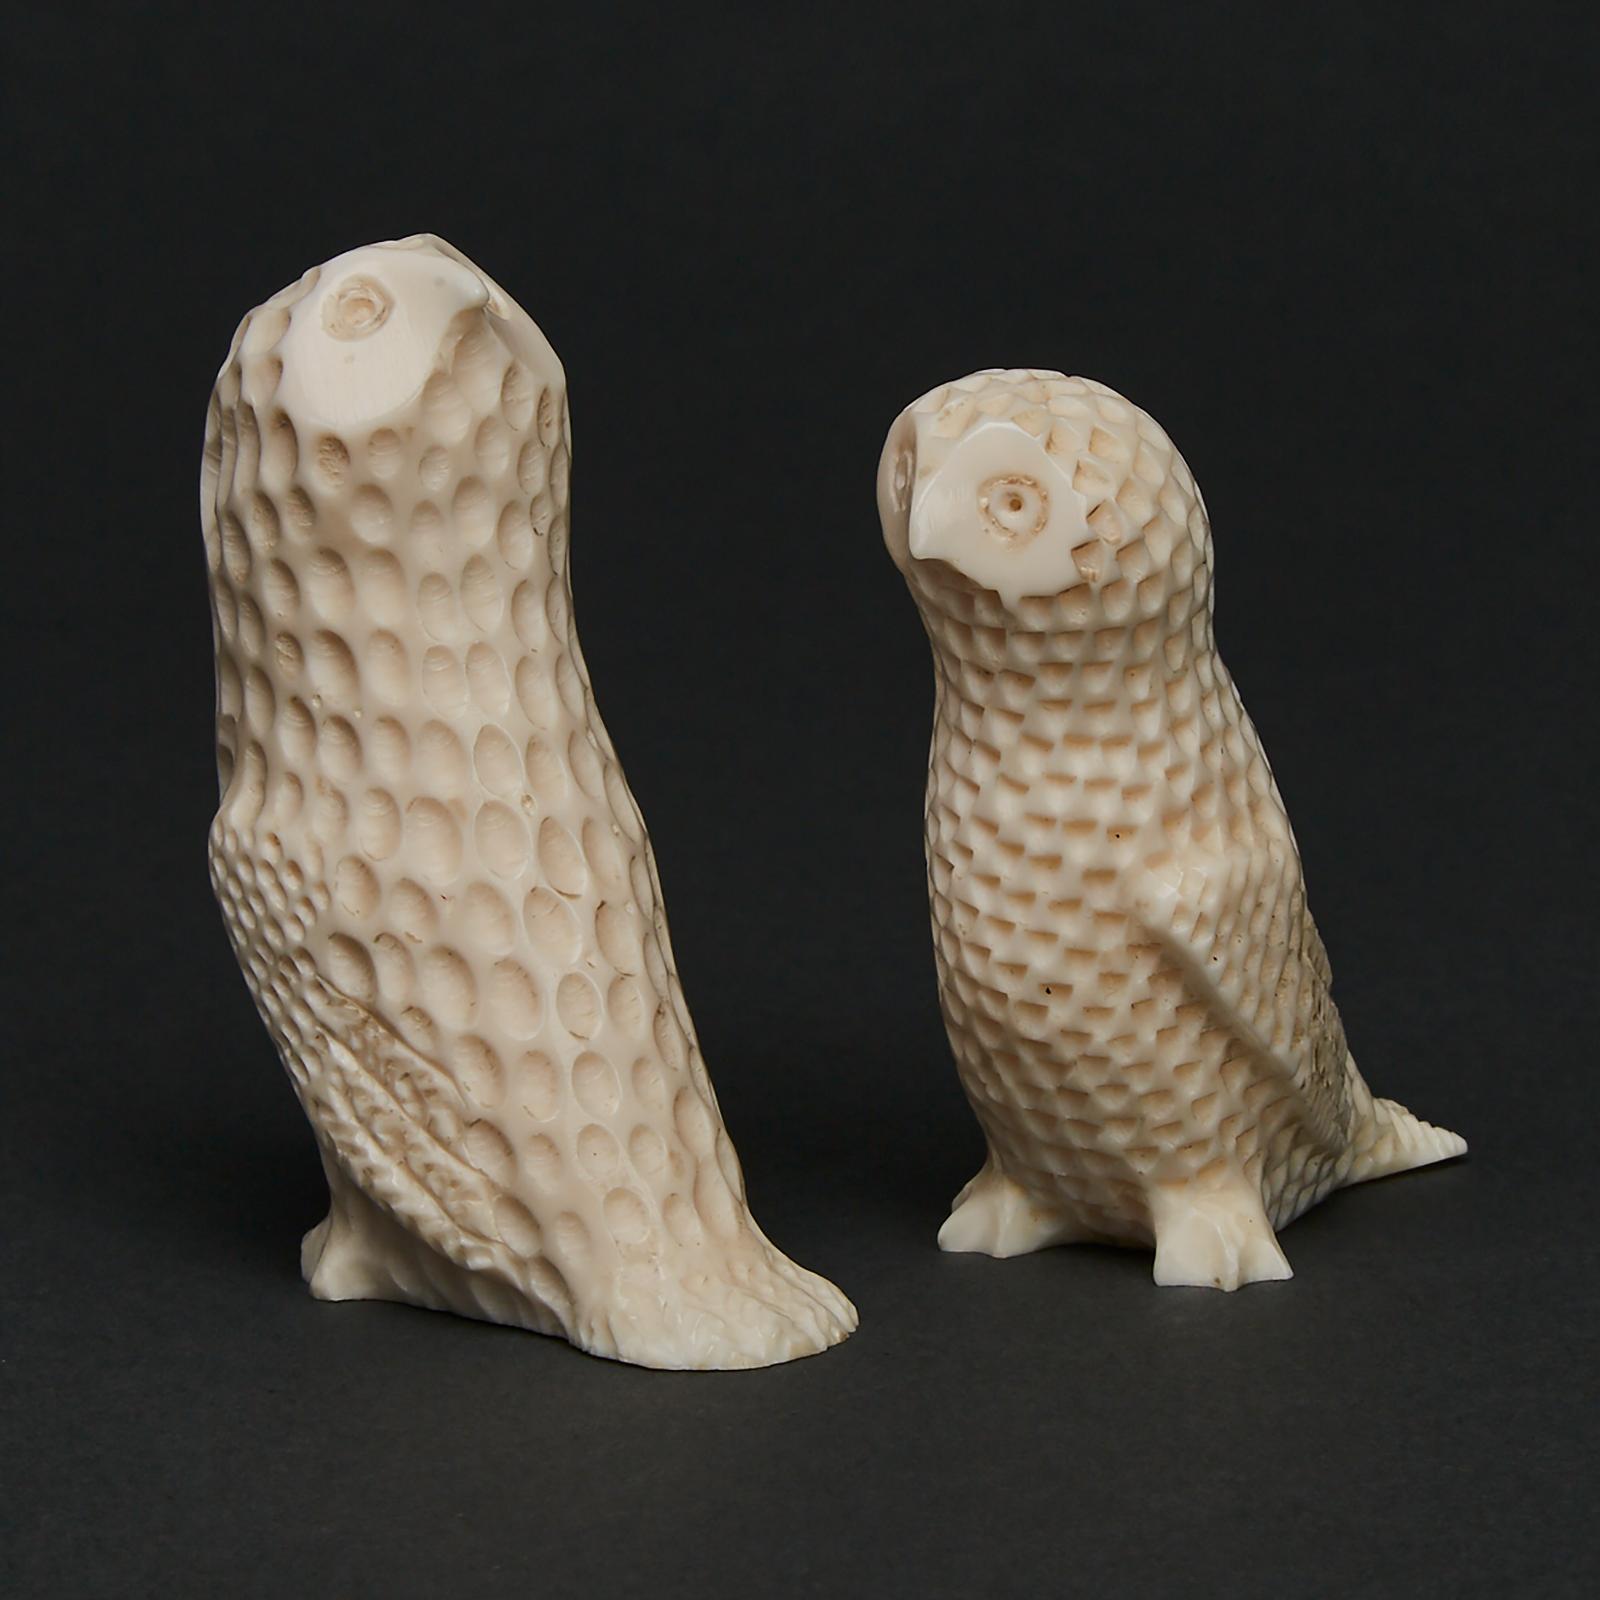 Roger Selook - Two Ivory Owls